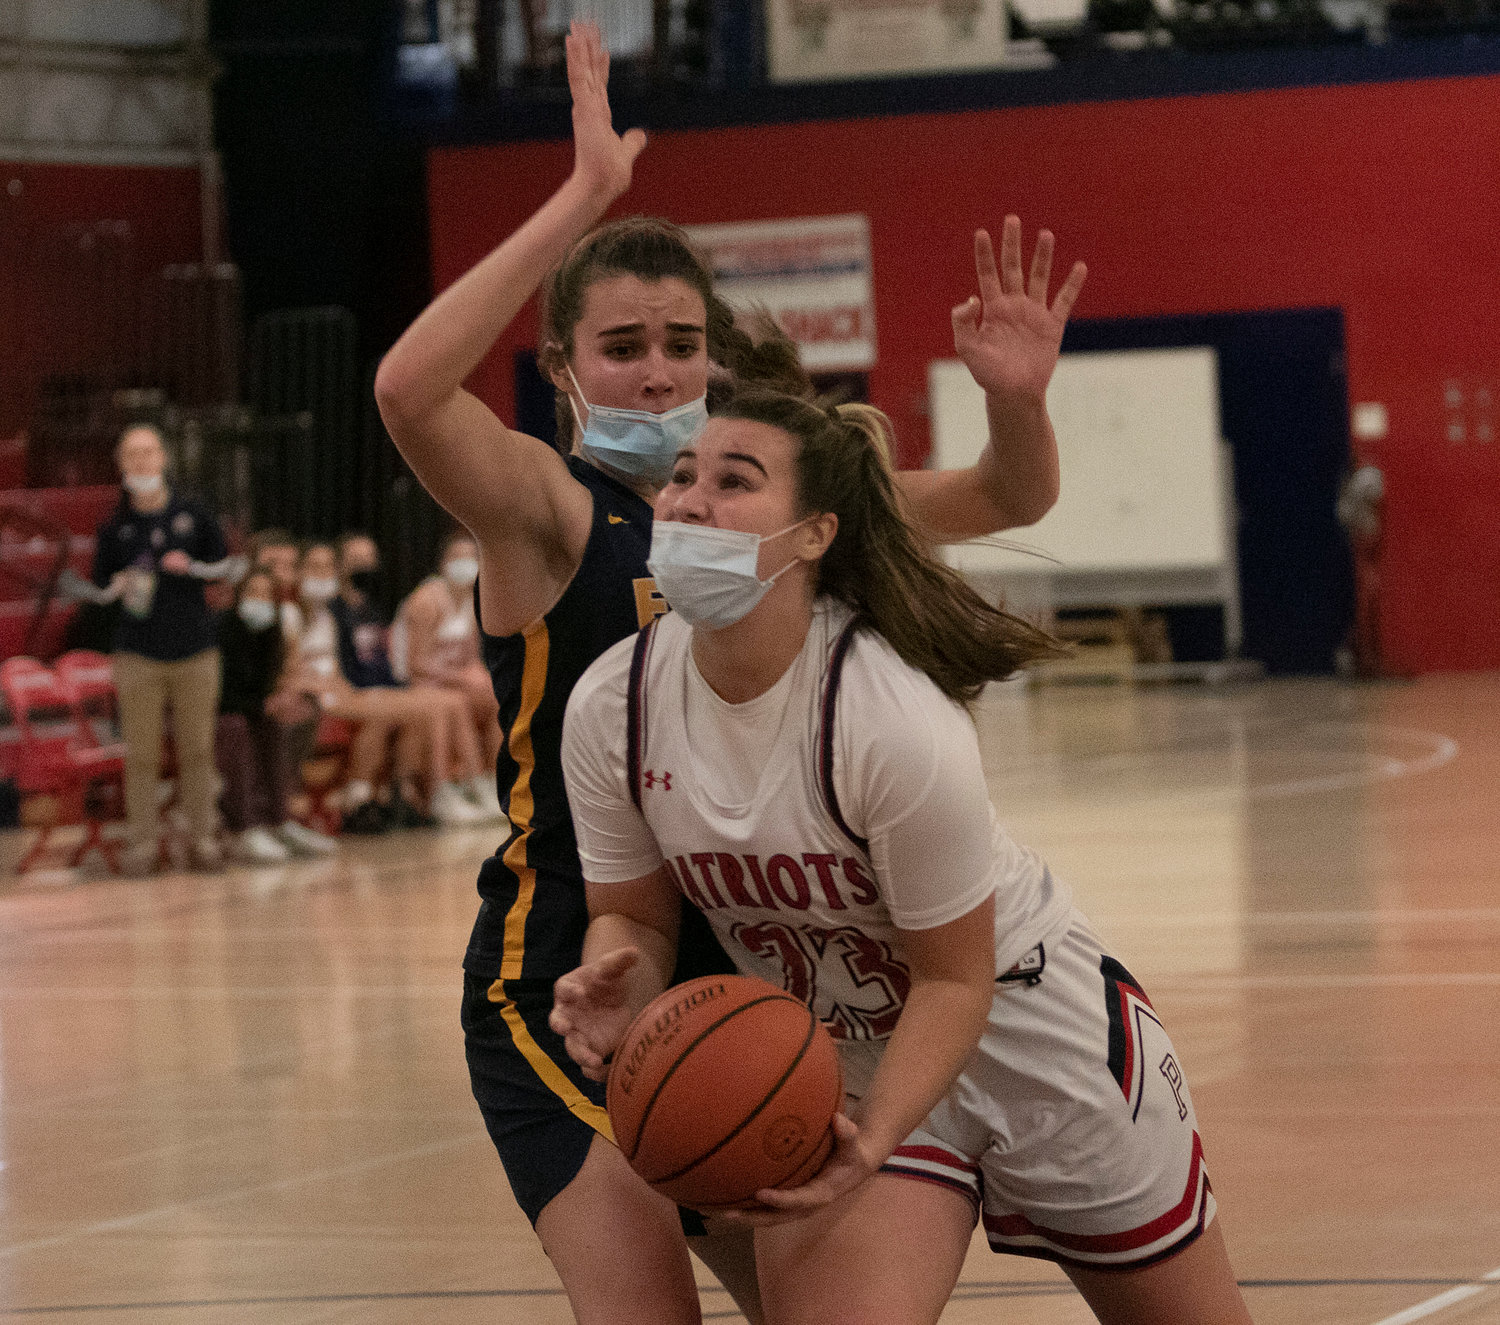 Emily Maiato looks to shoot from under the hoop.